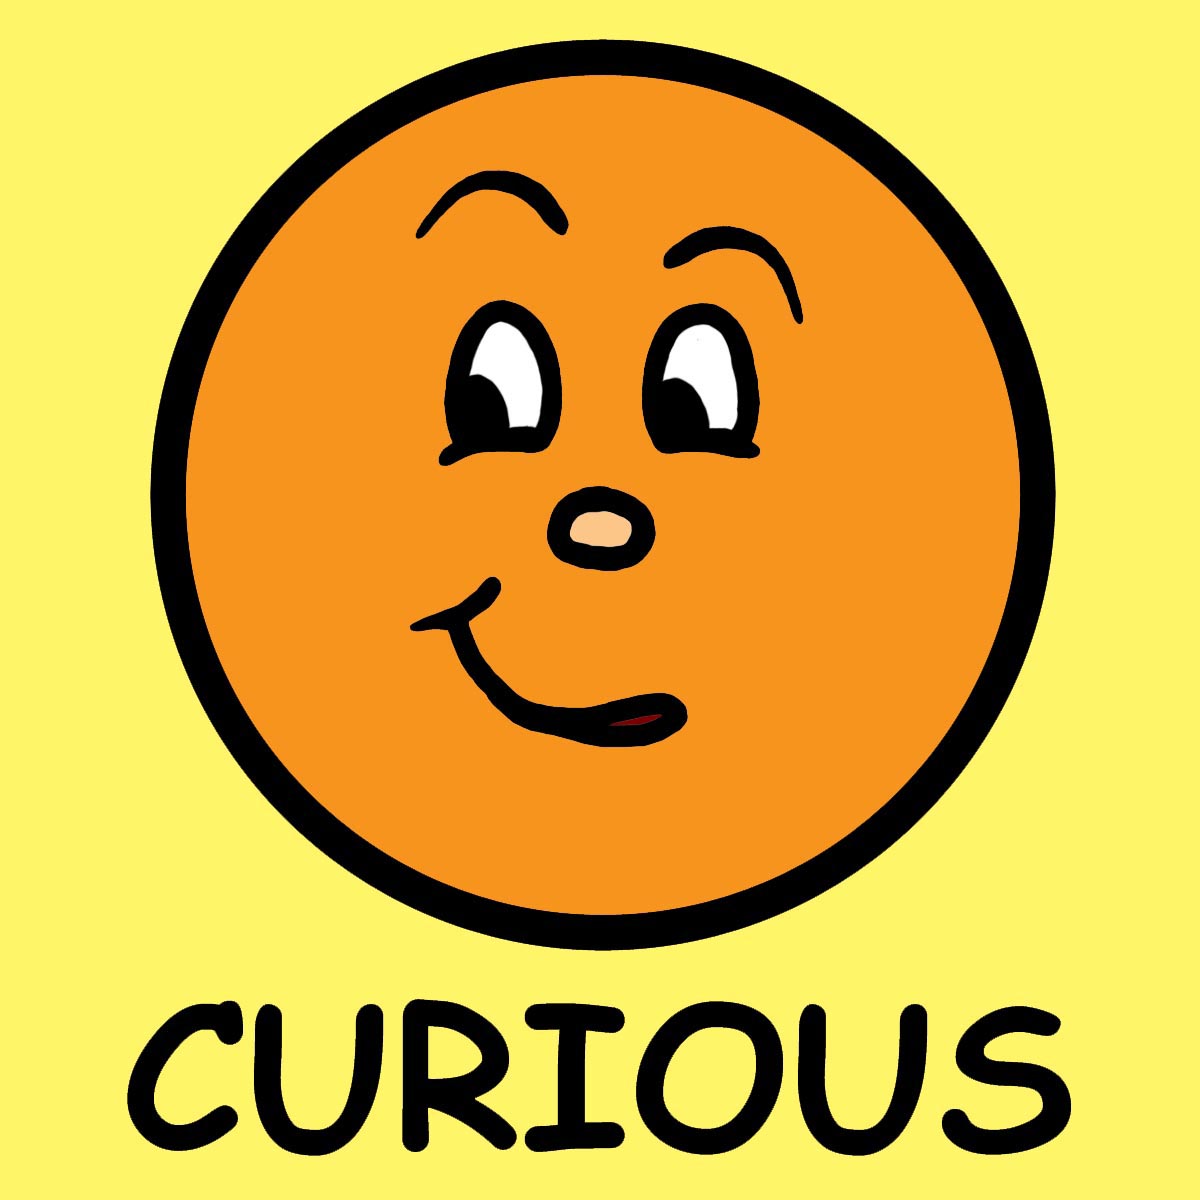 curious expression clipart